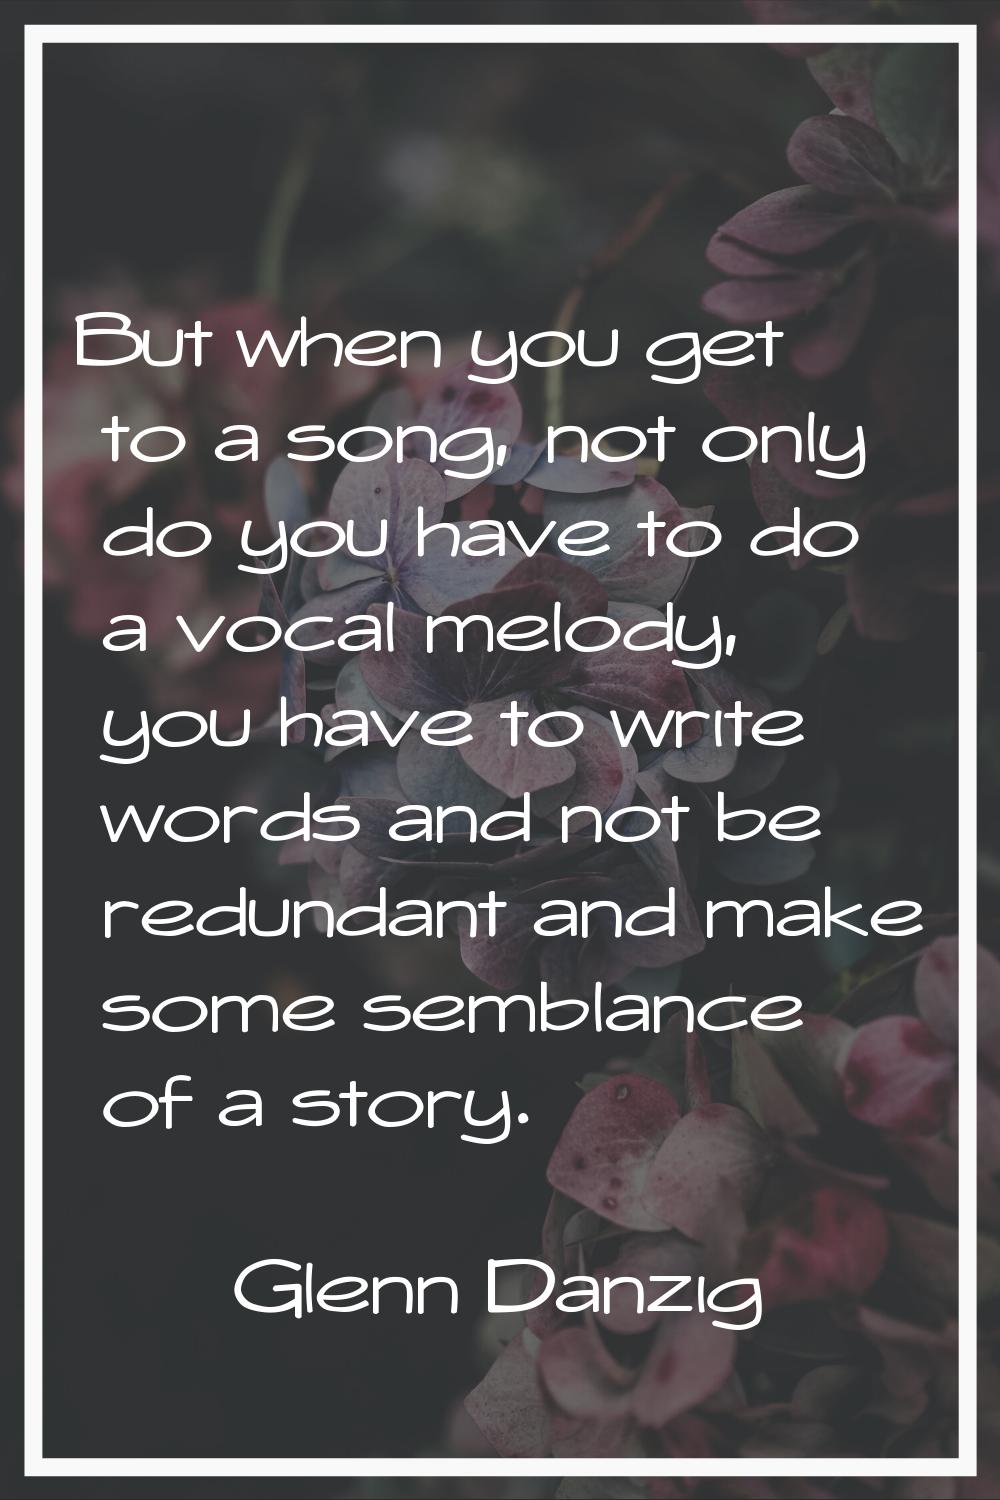 But when you get to a song, not only do you have to do a vocal melody, you have to write words and 